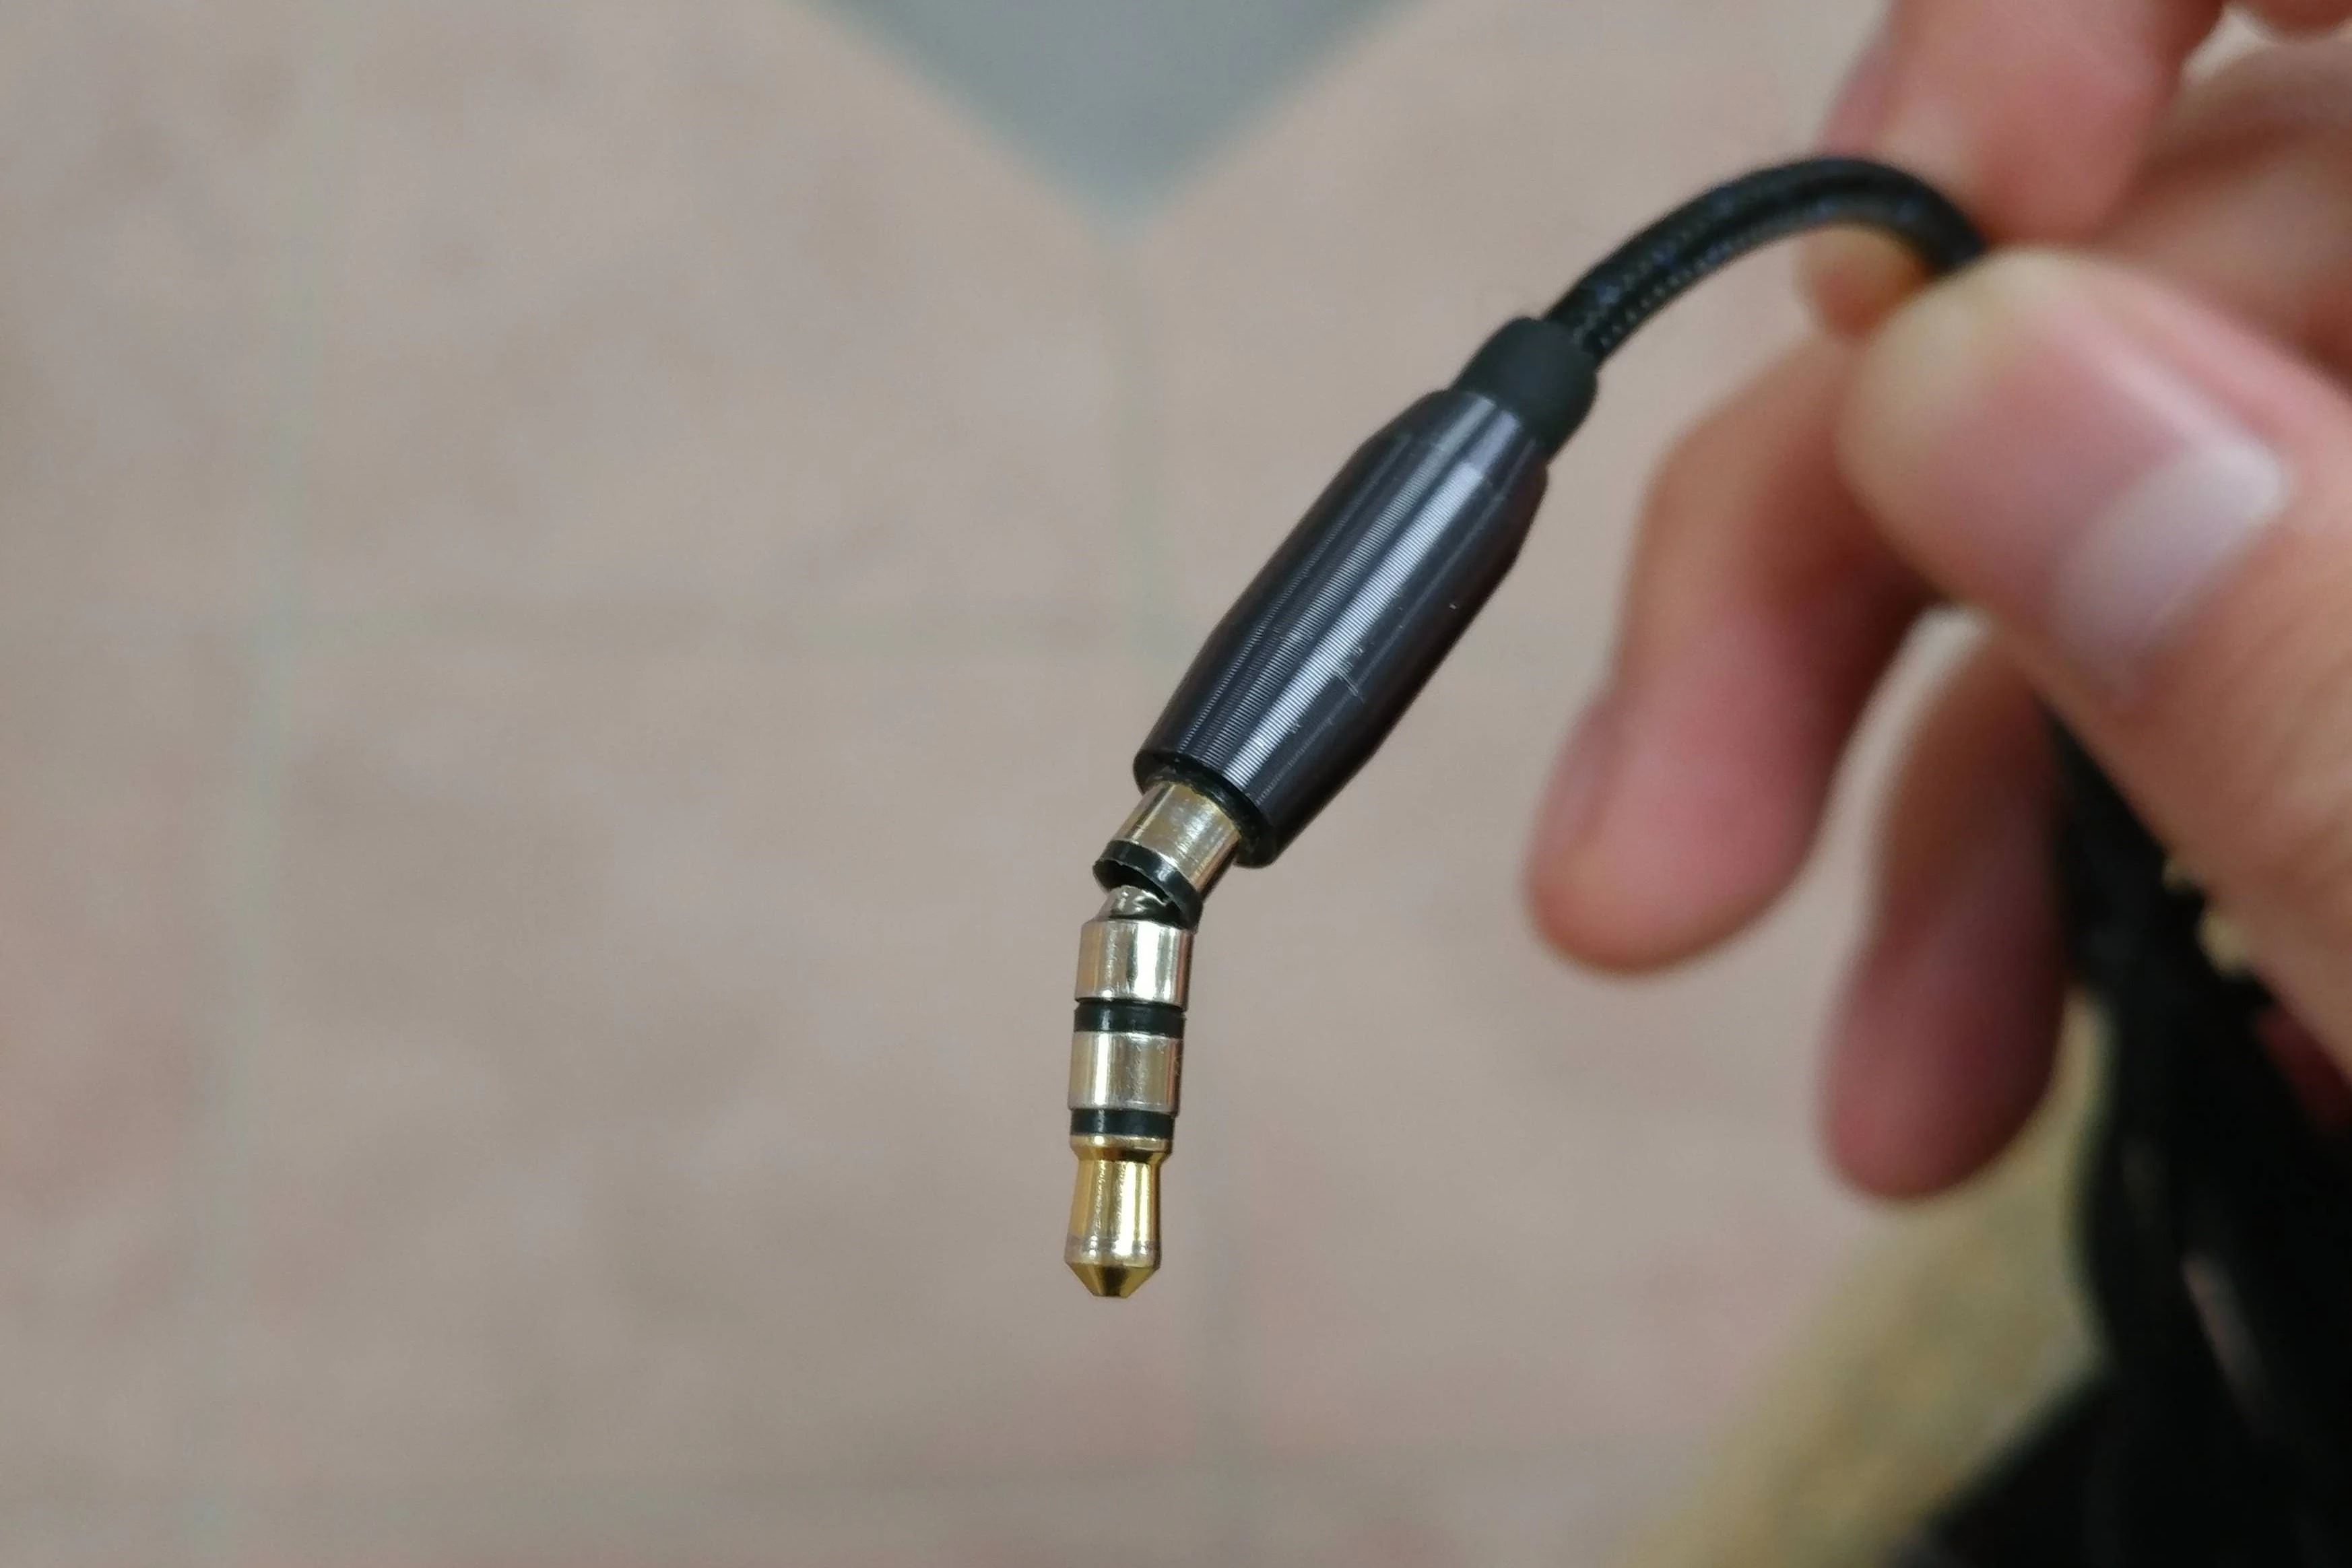 Fixing A Broken Headset Jack: Step-By-Step Guide